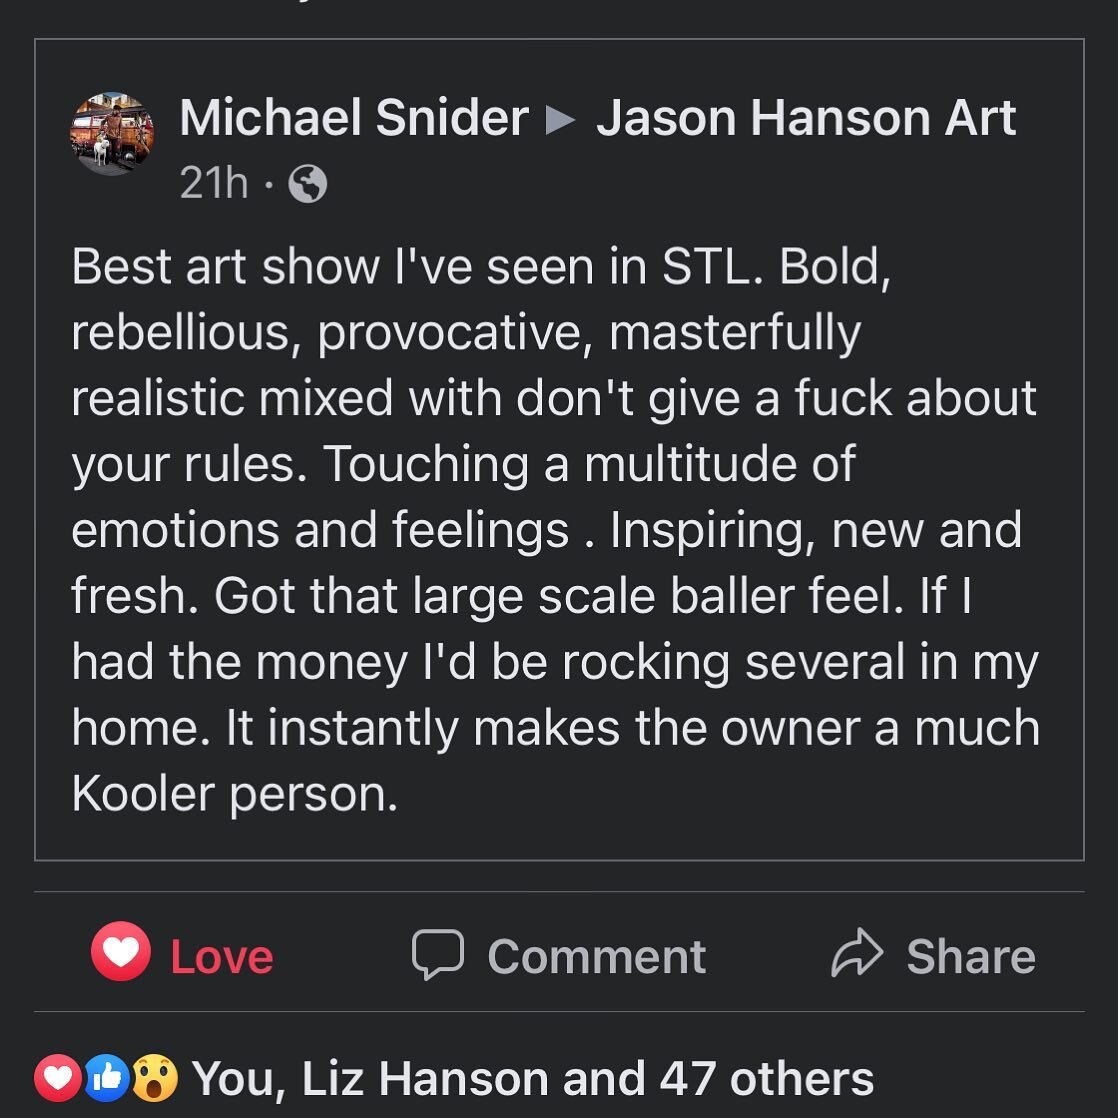 My favorite review so far from my art show. If you were one of the 250+ people who came out, what did you think of it? 

I really want to know!!